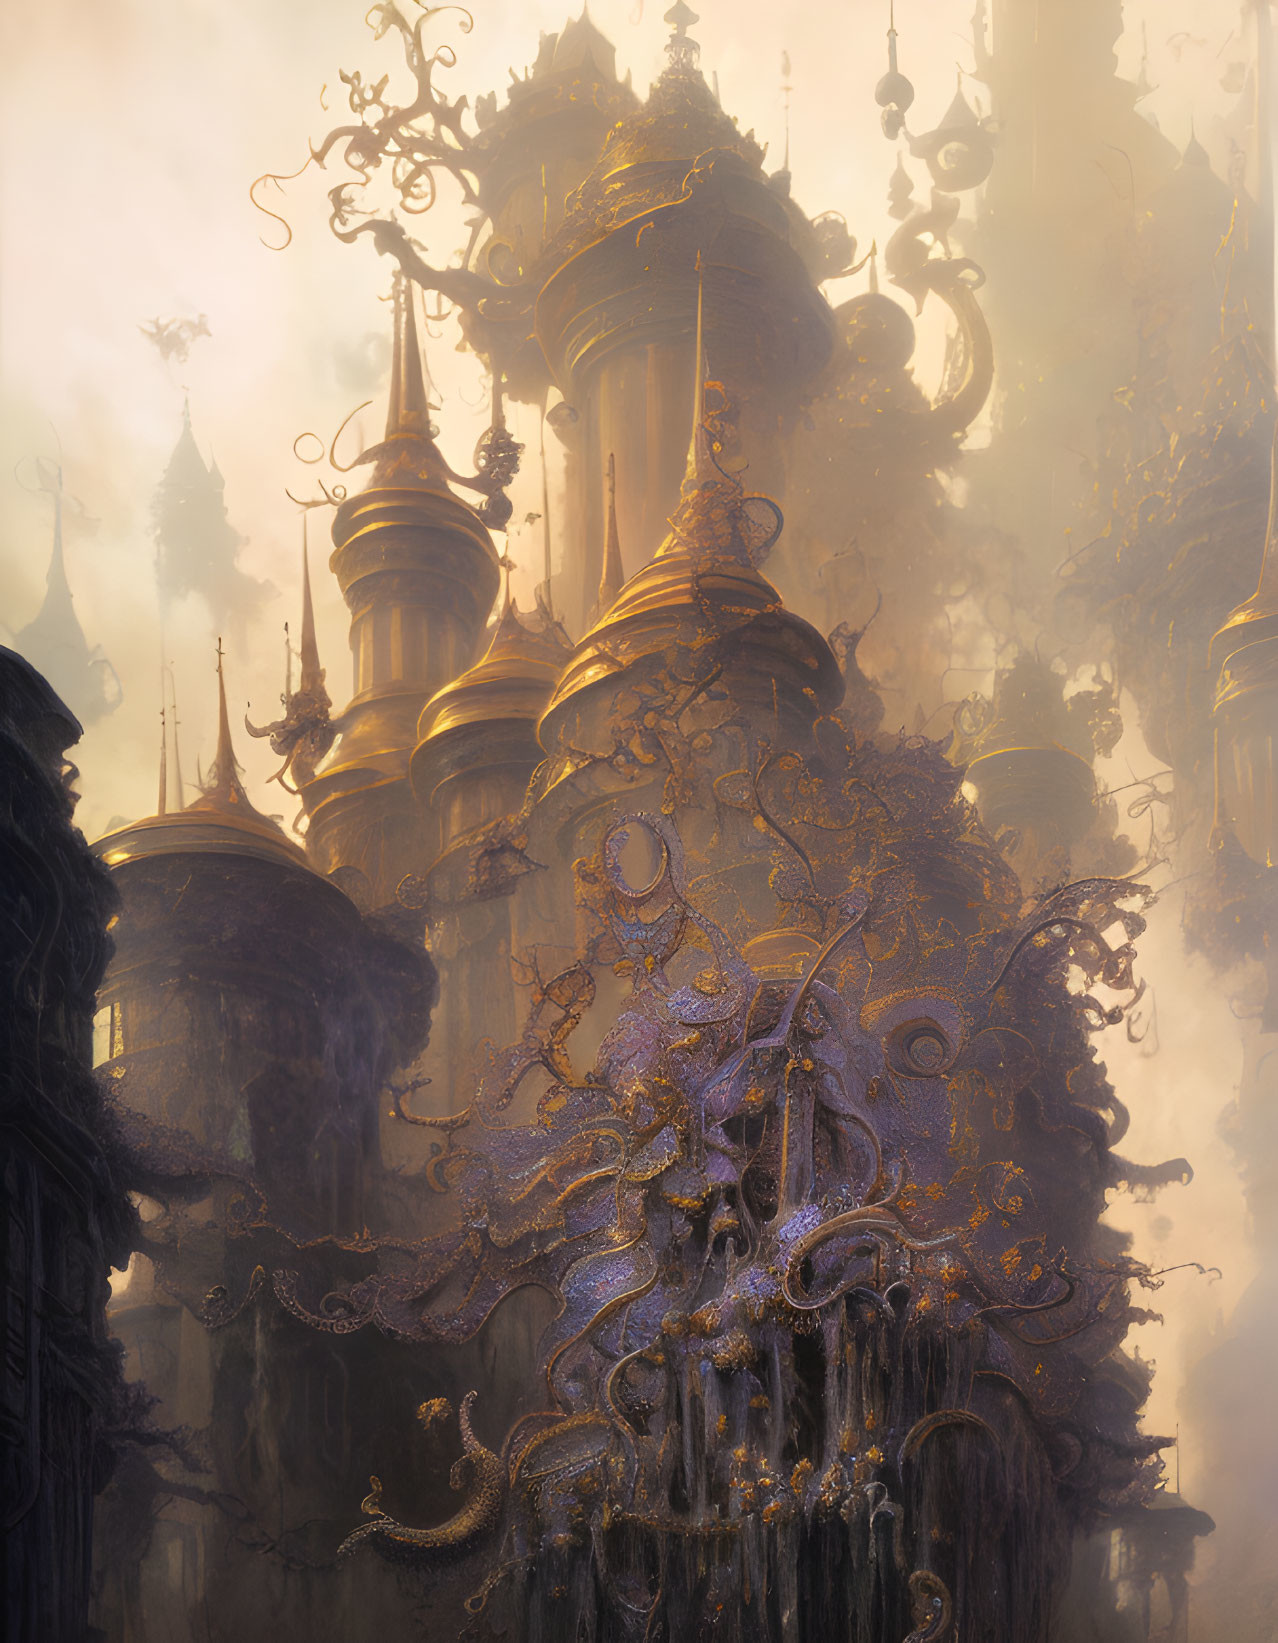 Golden fantasy castle in mist with intricate details and towering spires.